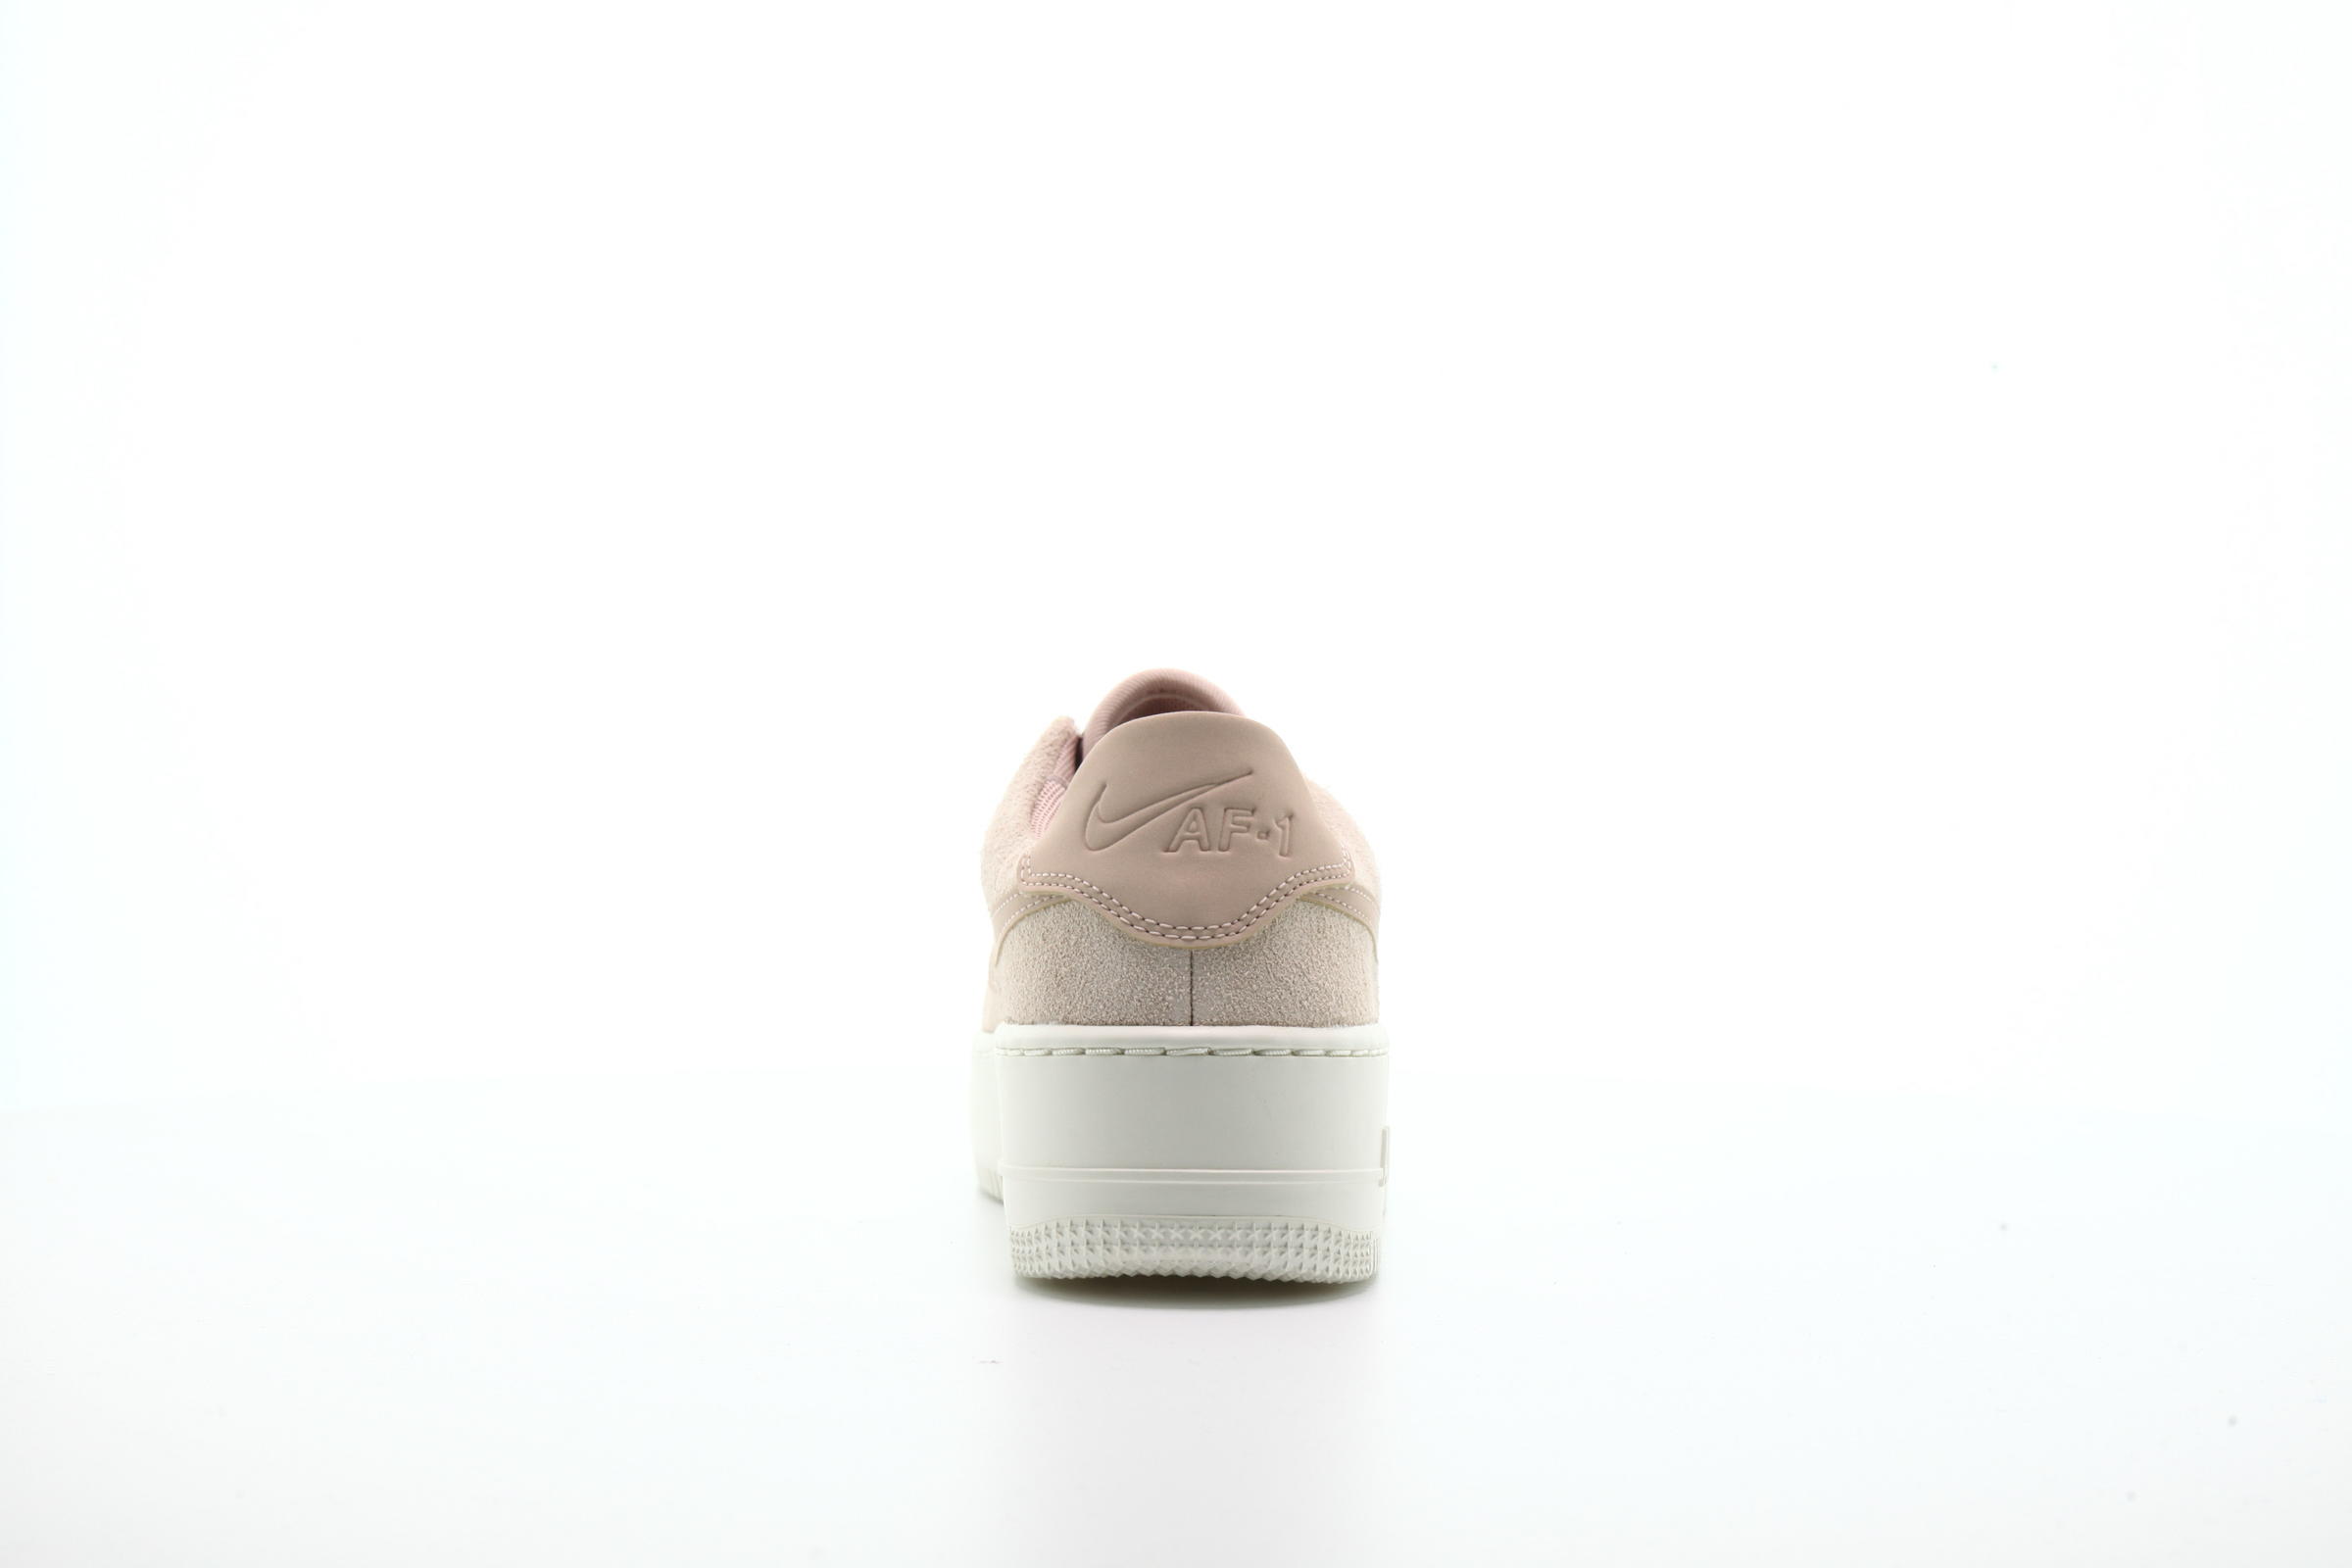 Nike WMNS Air Force 1 Sage Low "Particle Beige"